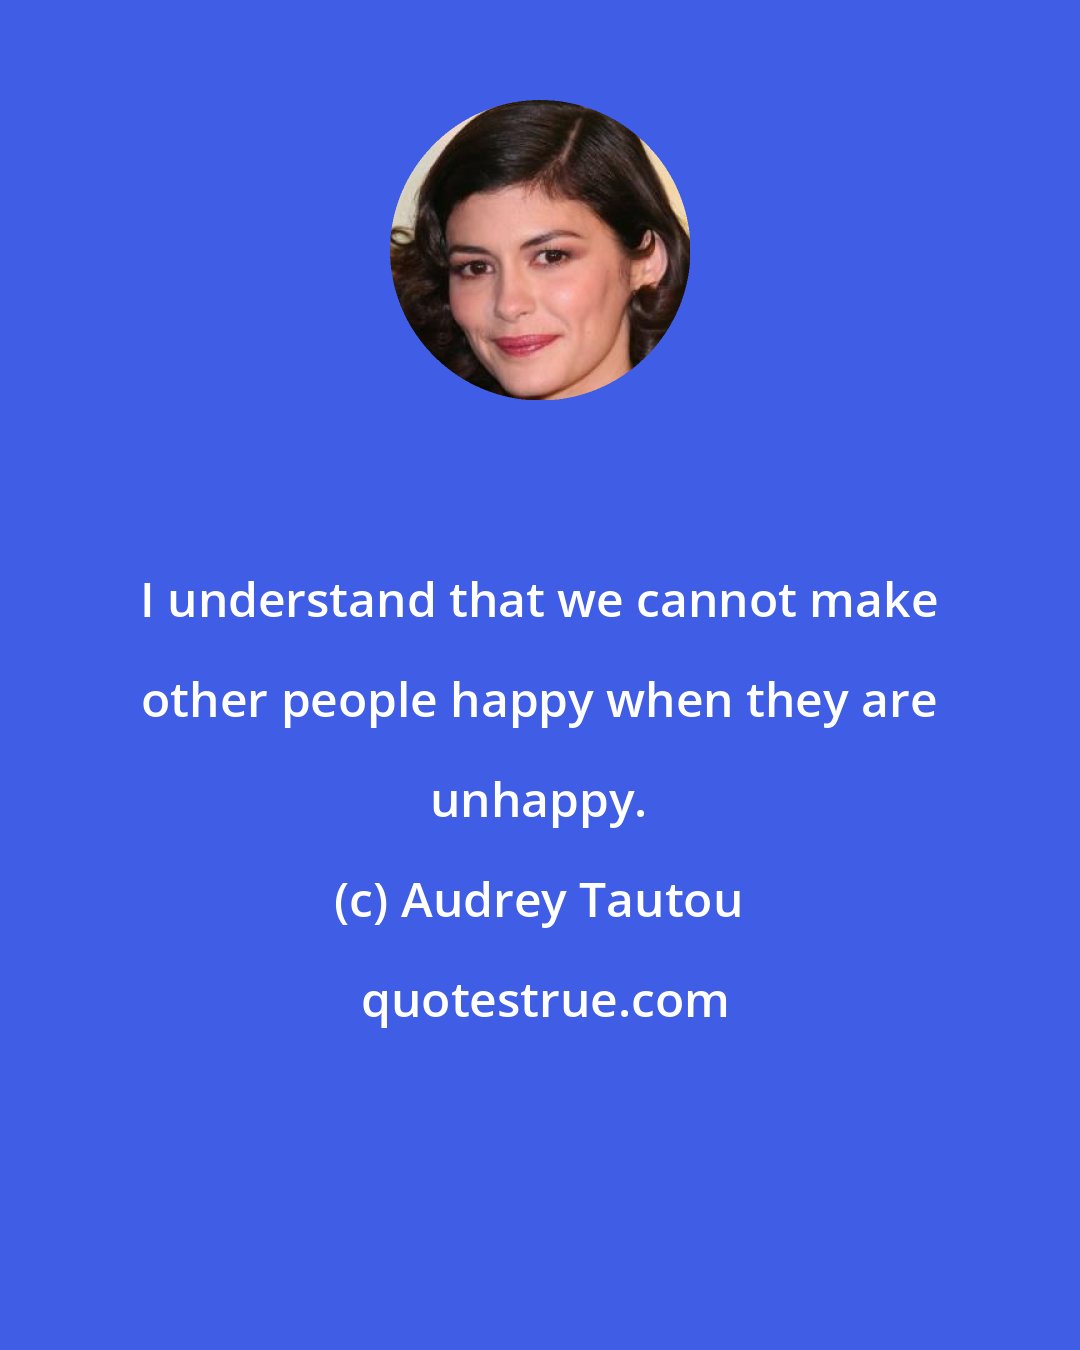 Audrey Tautou: I understand that we cannot make other people happy when they are unhappy.